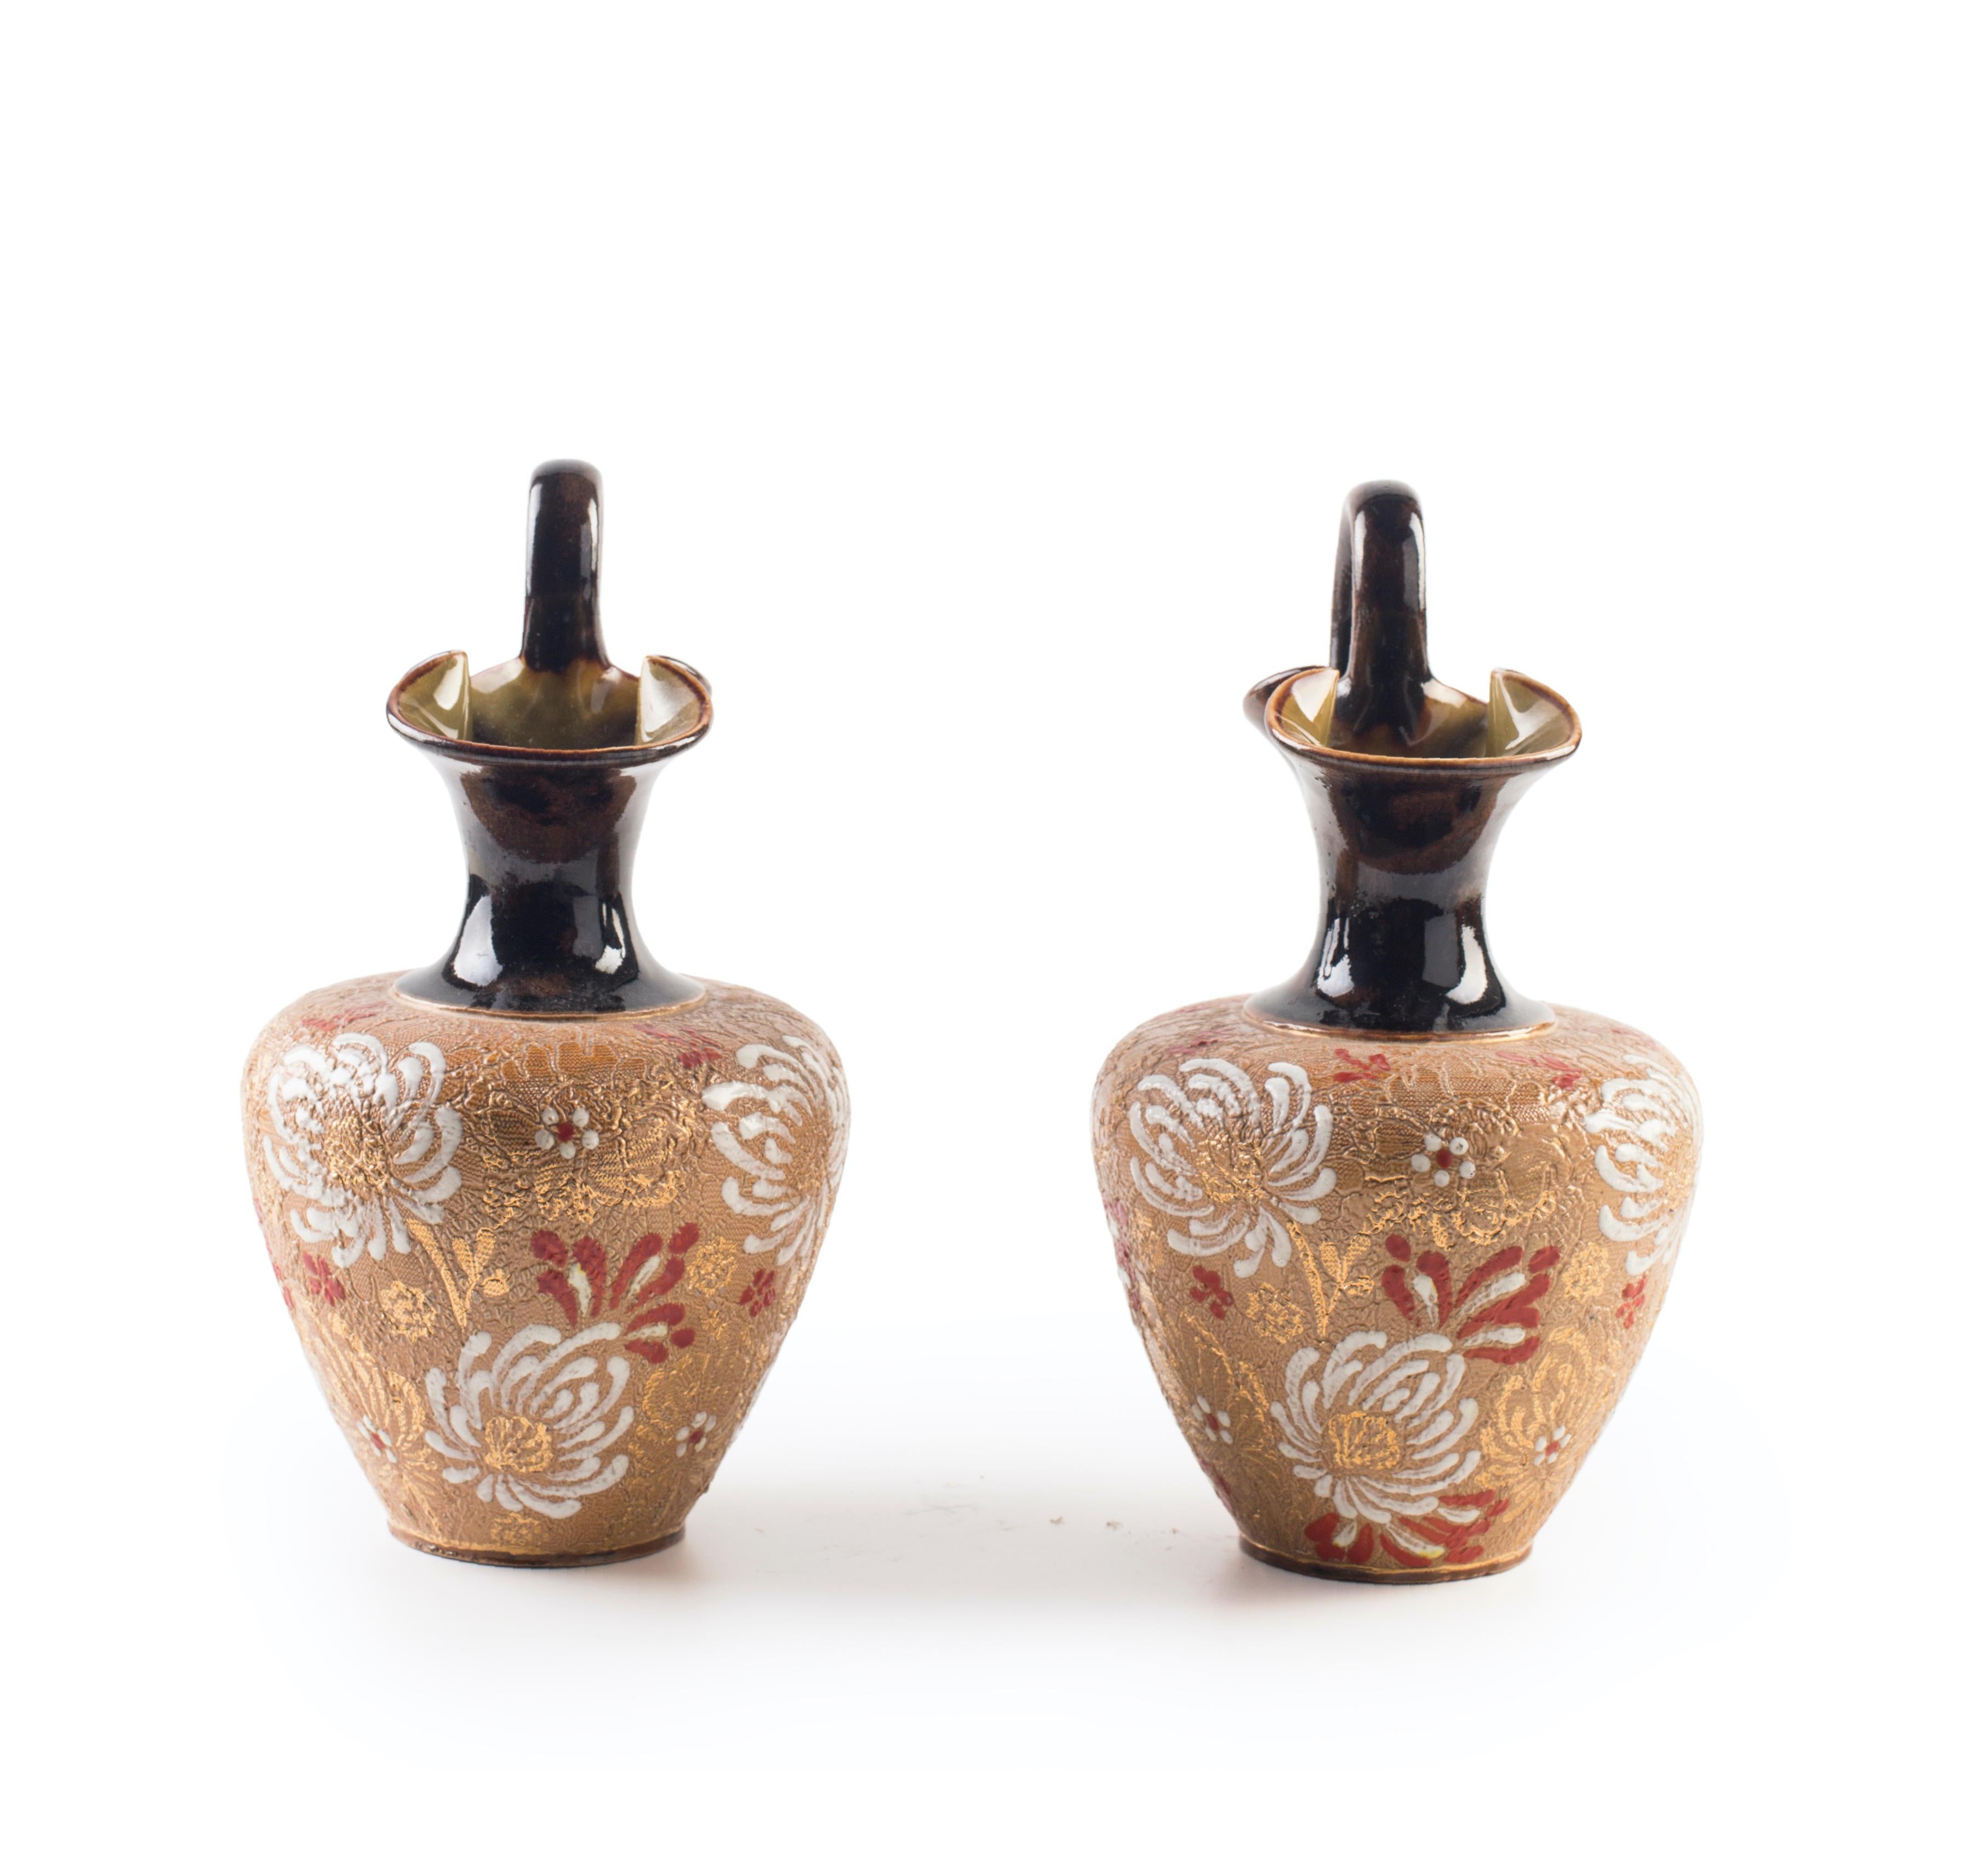 These decorative jugs are original decorative objects realized at the end of the 19th century.

This beautiful couple of jugs were realized by the famous manufacturing company Royal Doulton.



Very good conditions.

This beautiful couple of